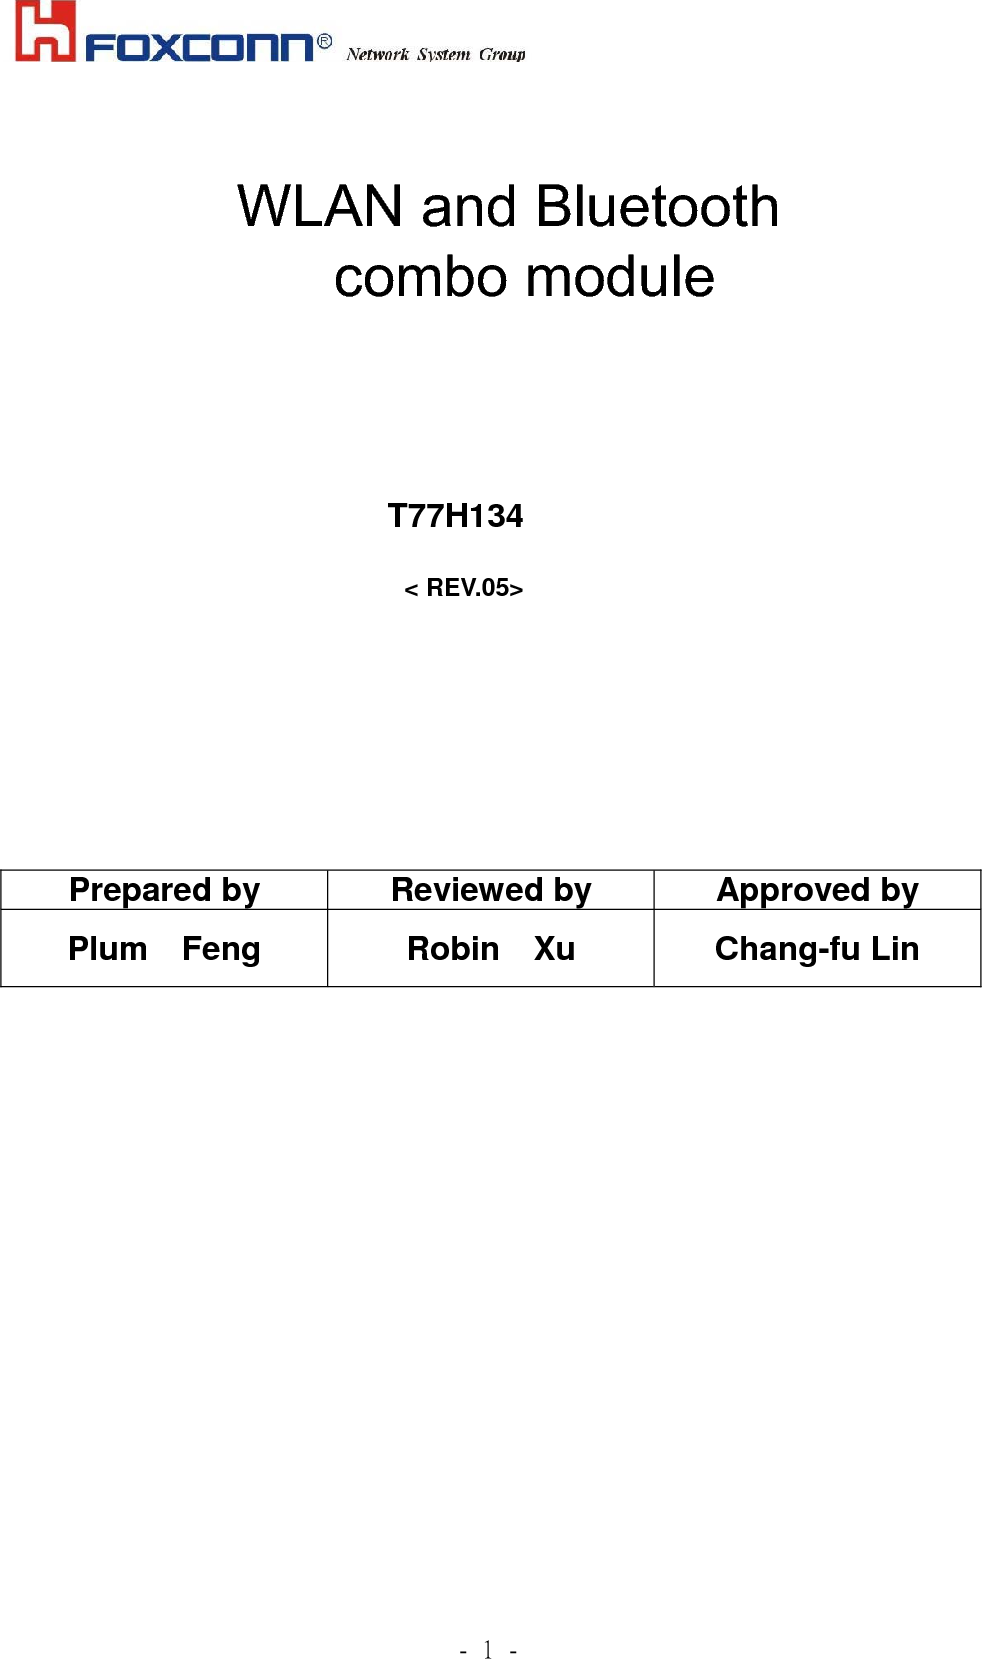             .!2!.!    MARVELL 88W8688 Mini-Module (IEEE 802.11b/g+BT 2.1 EDR)  Marketing Requirements Specification                          T77H134.00                          &lt; REV.05&gt;         Prepared by  Reviewed by  Approved by Plum  Feng  Robin  Xu  Chang-fu Lin                      WLAN &amp; BT combo module           WLAN and Bluetooth                  combo module 